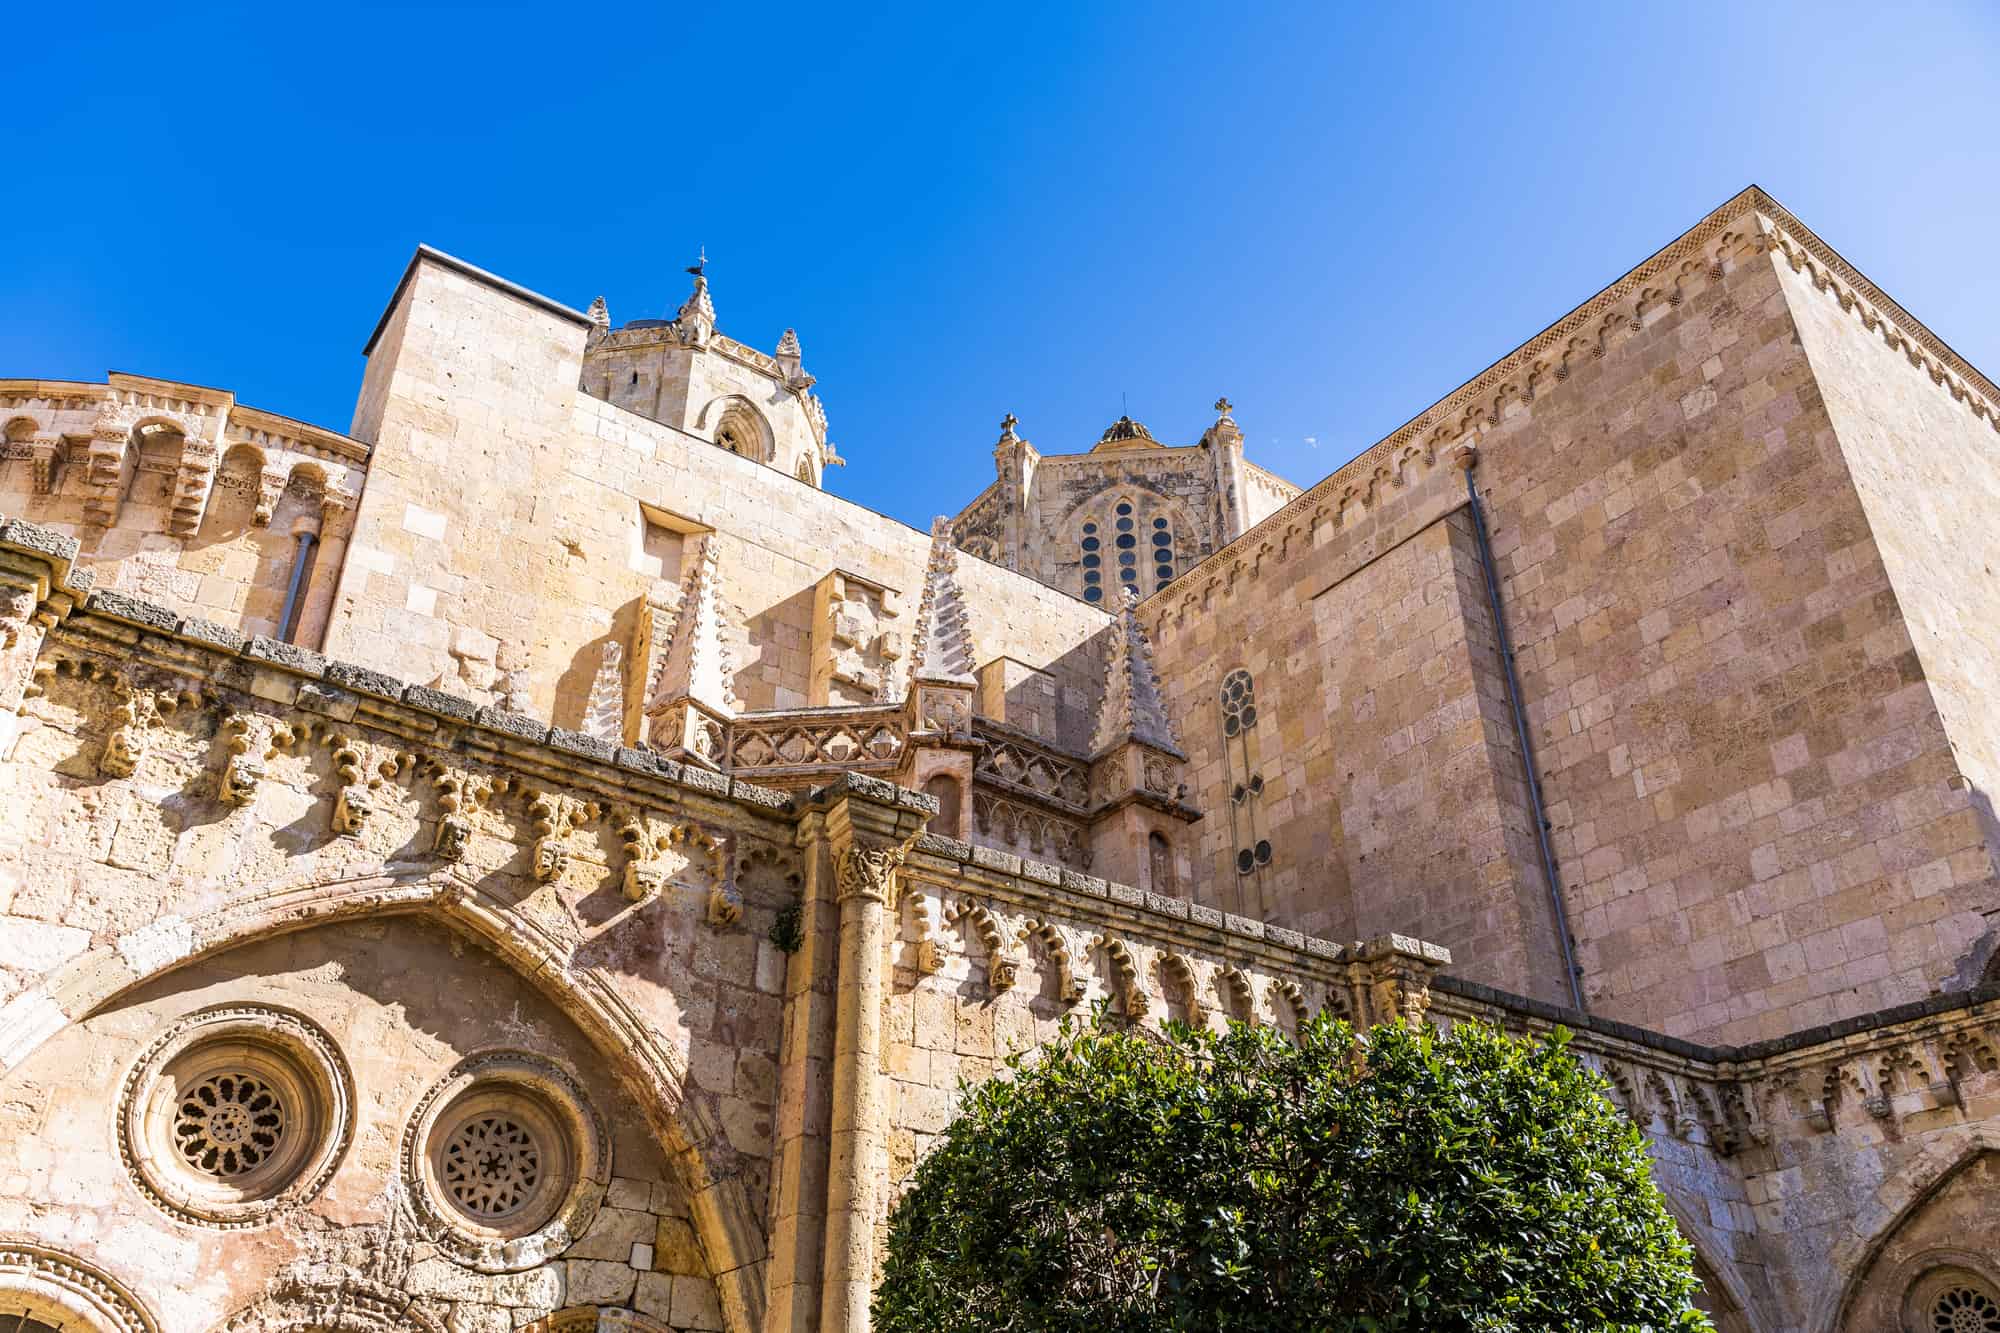 View of the walls from the inner courtyard of the cathedral santa maria of tarragona spain